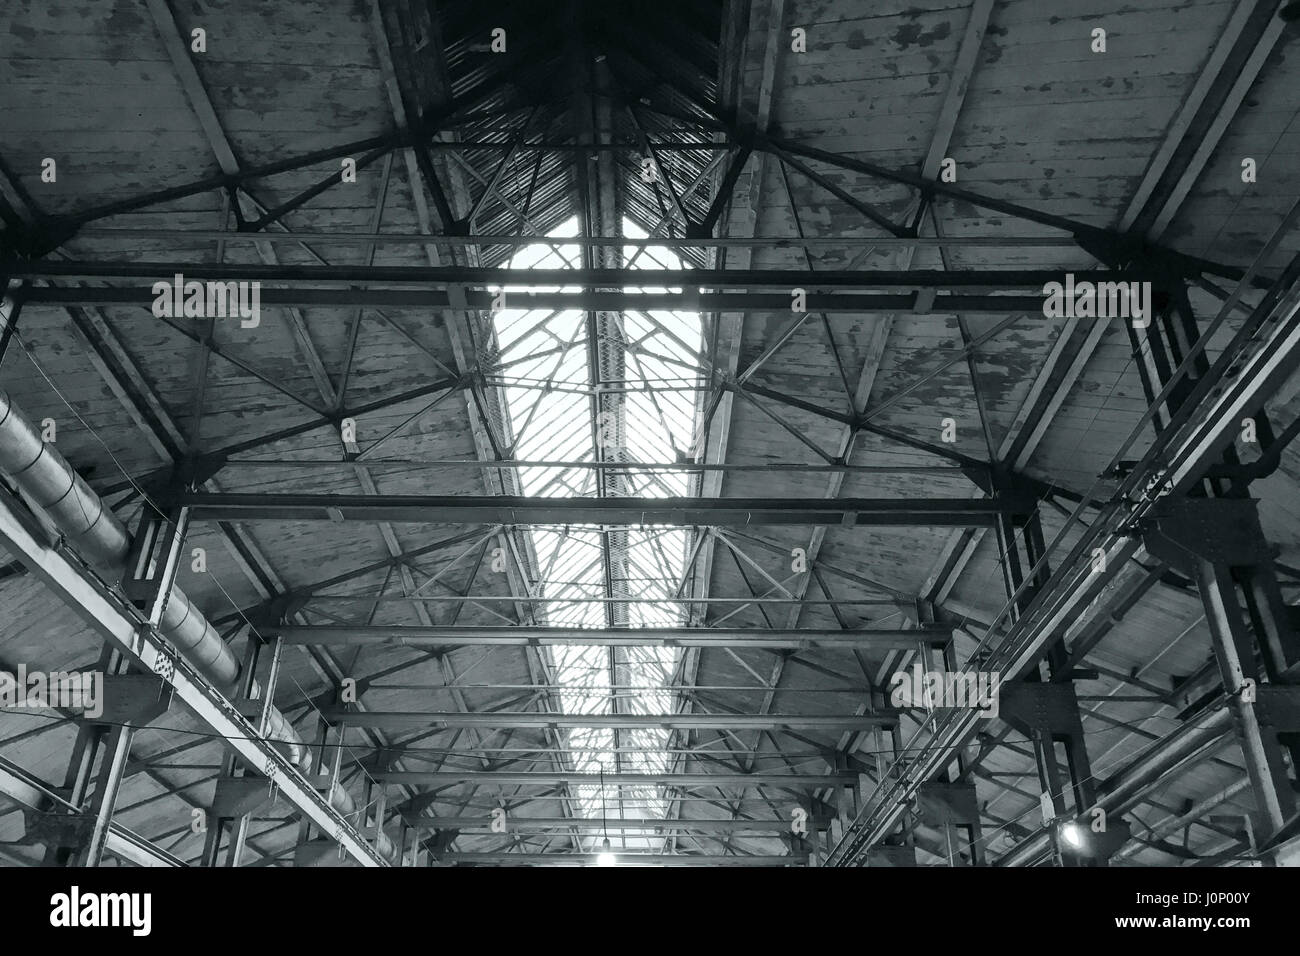 metal roof interiors structure of an old industrial building Stock Photo